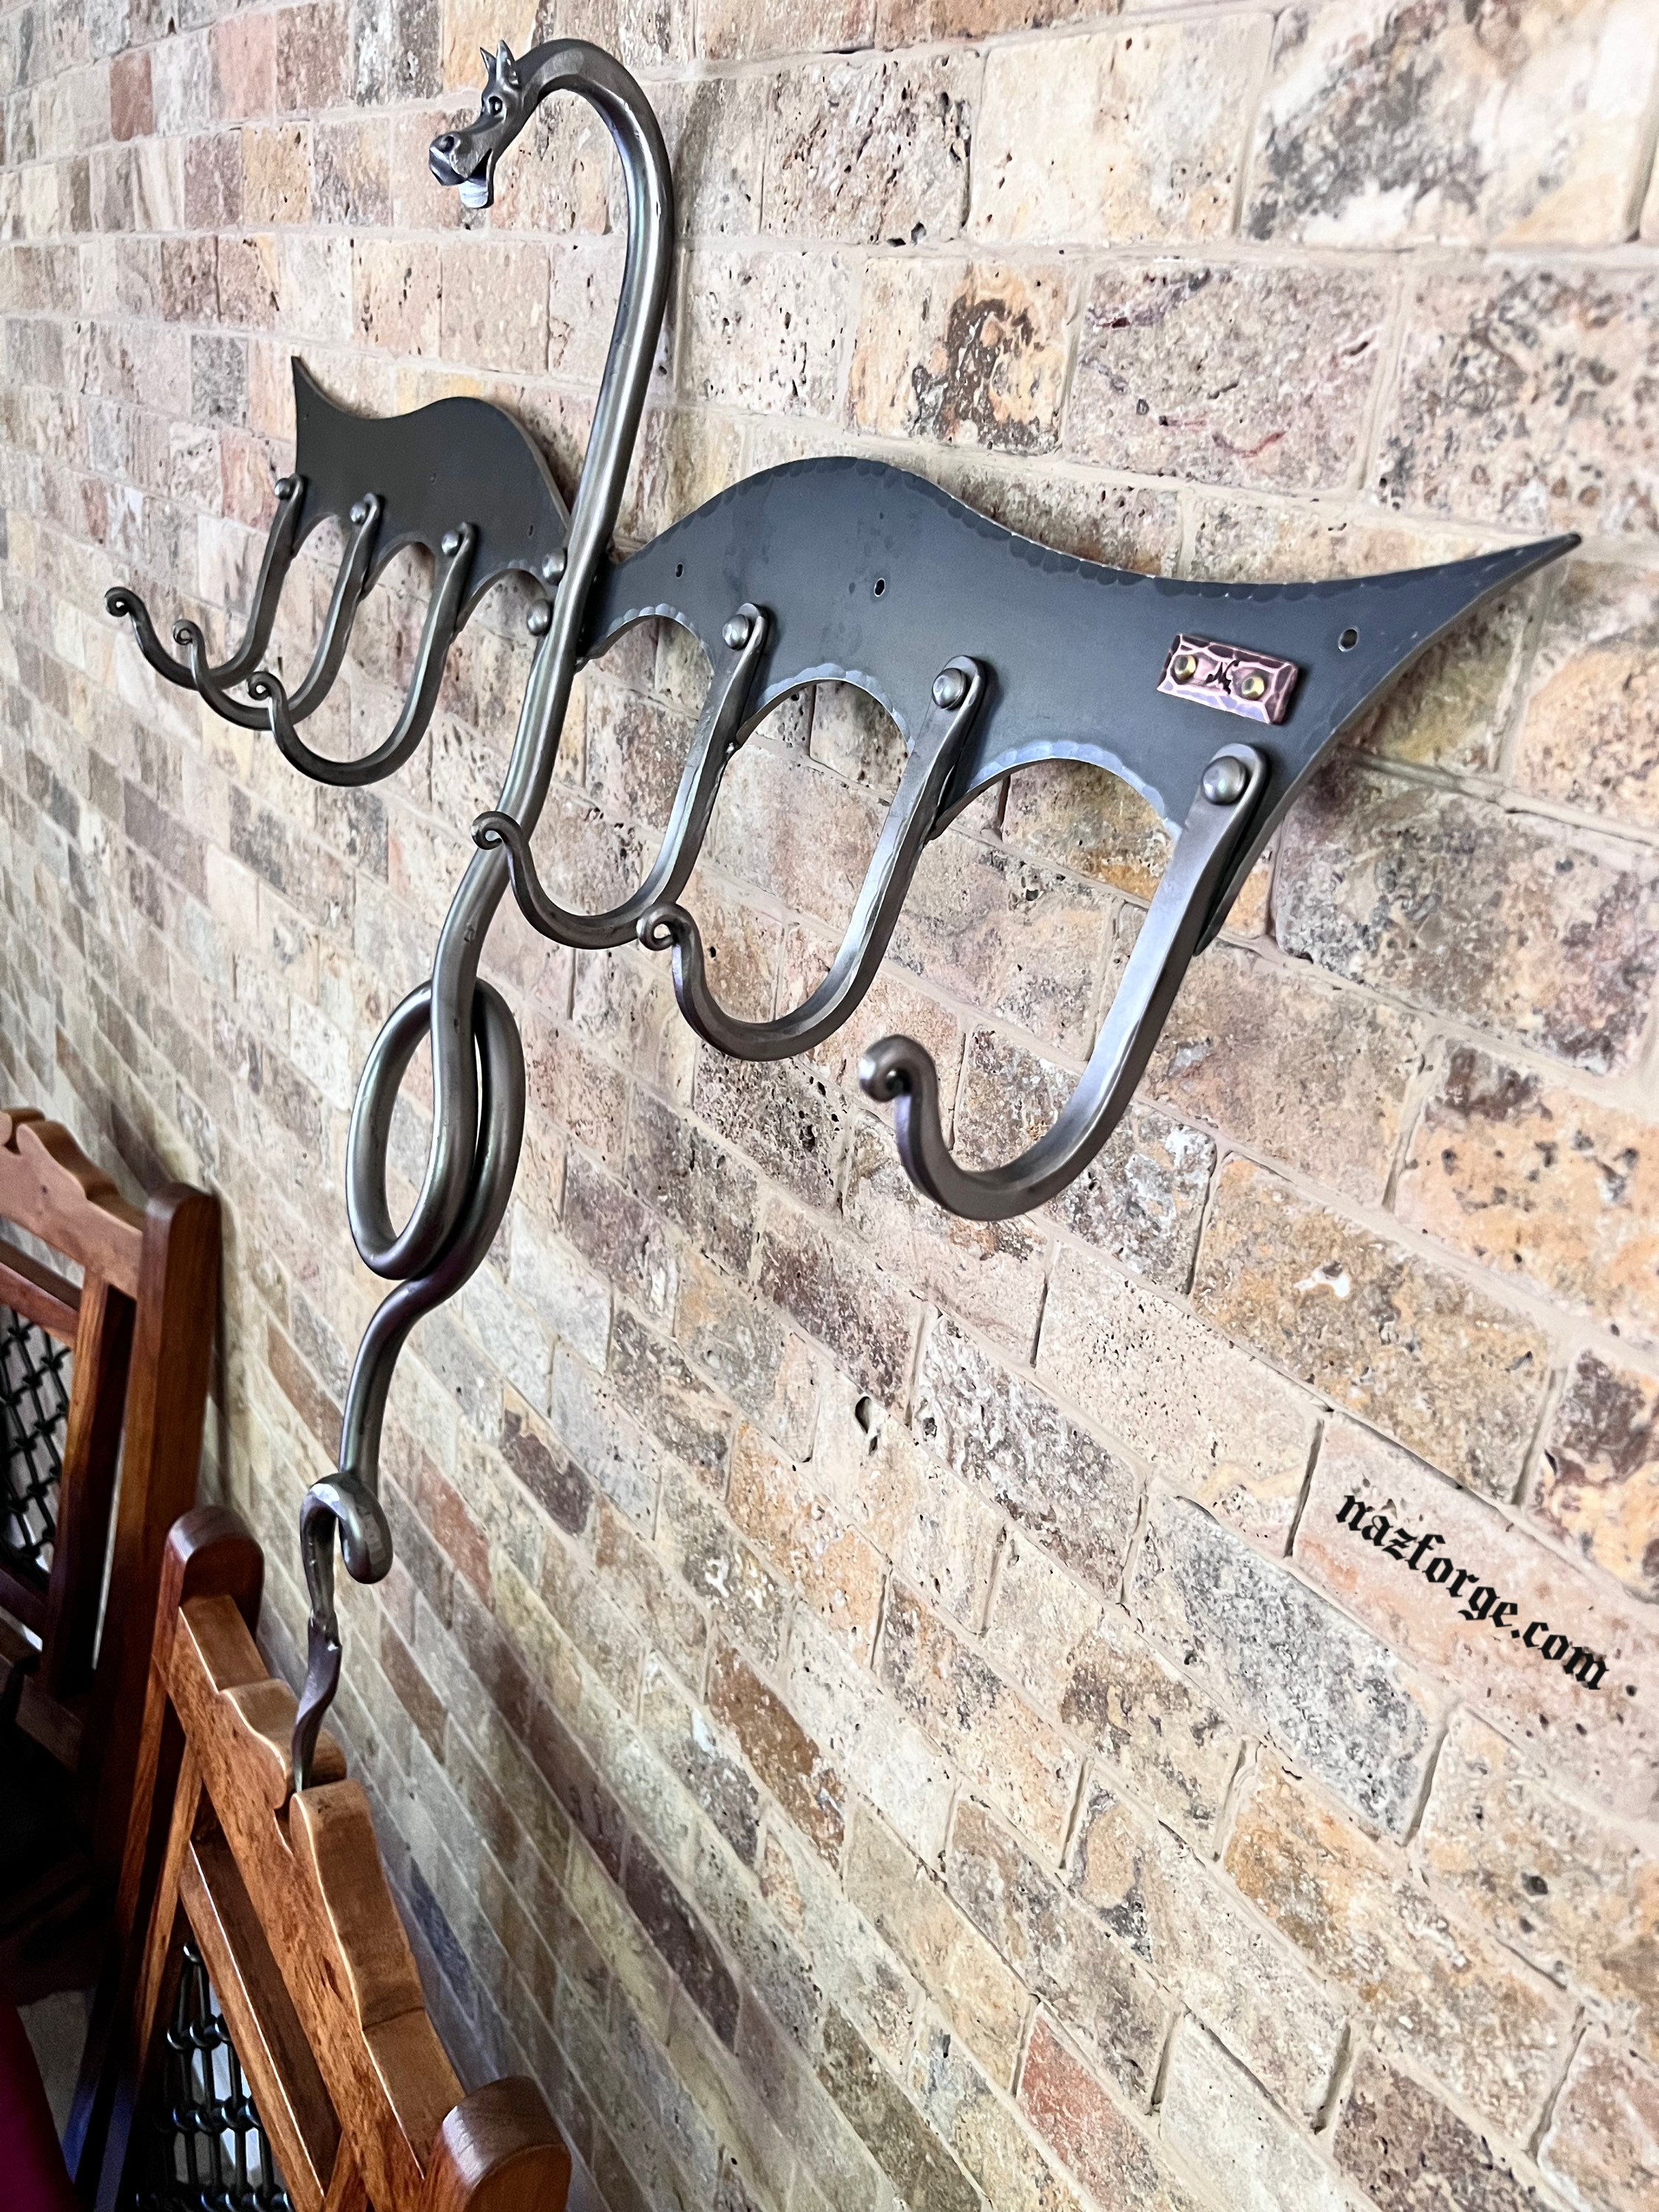 FORGED DRAGON COAT Rack by Naz - Hand Made by Blacksmith - Unique